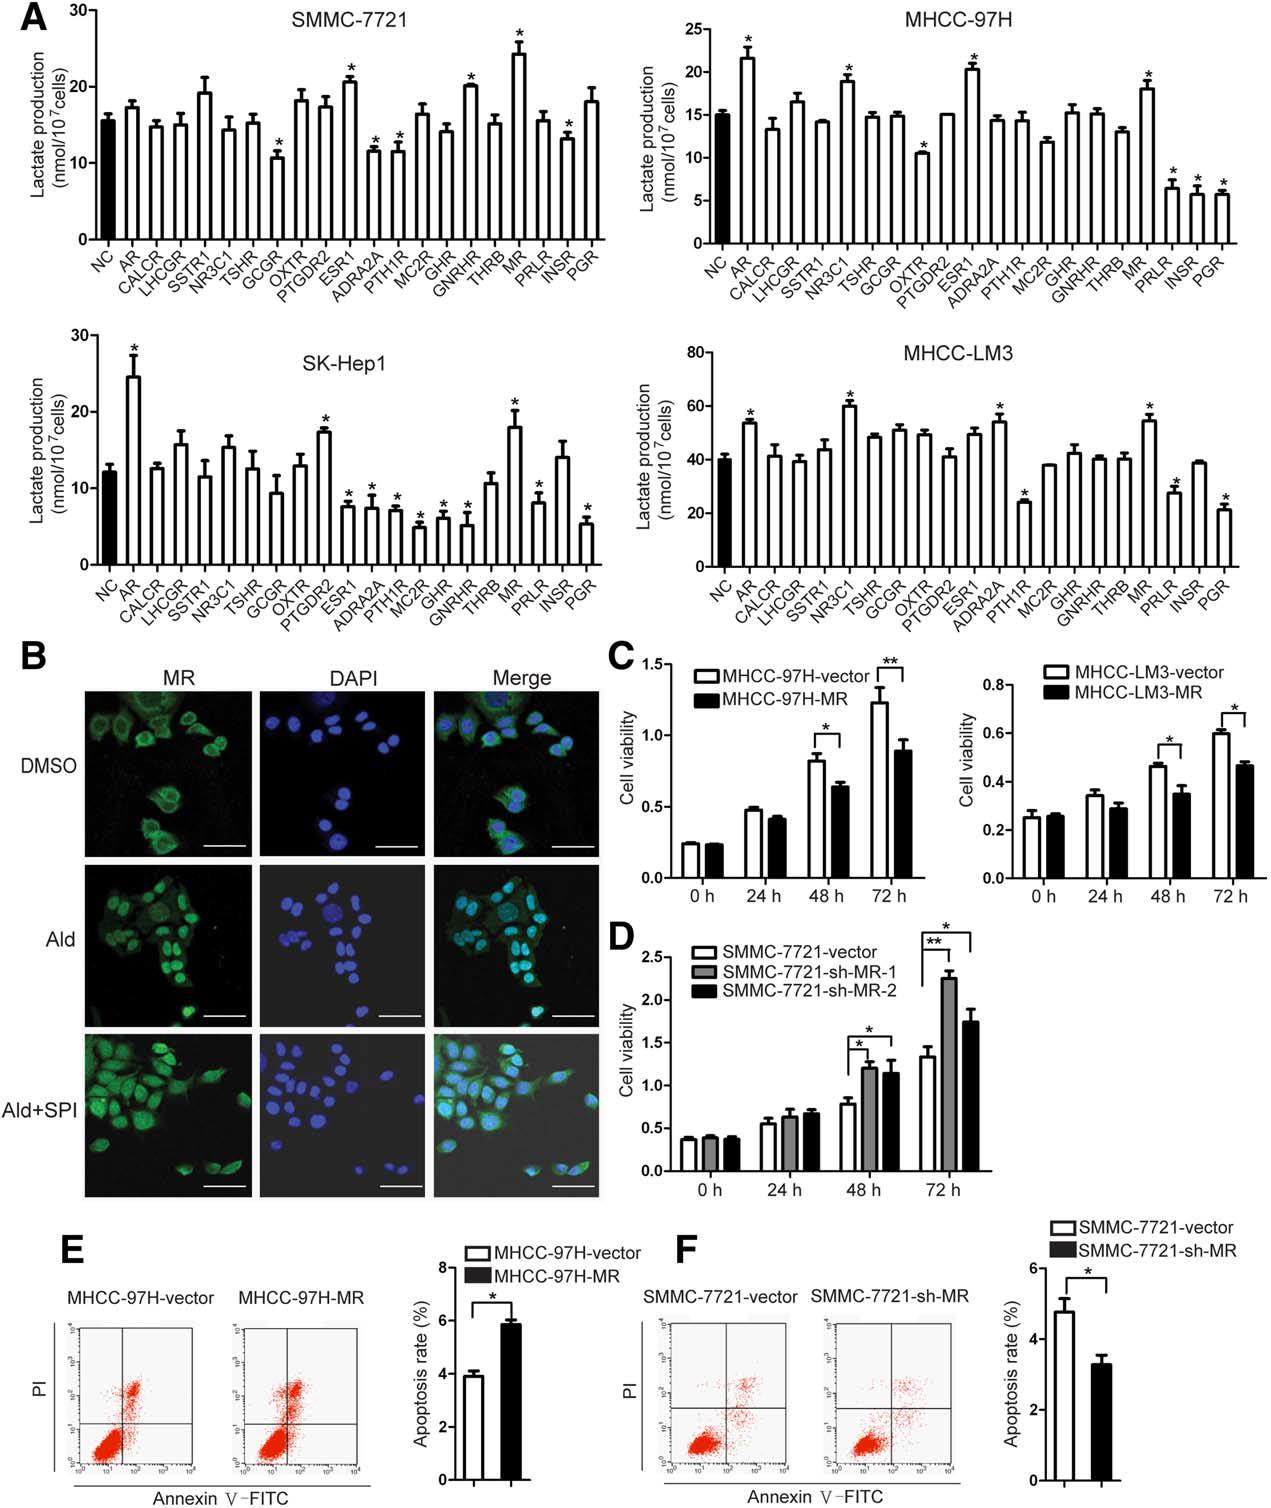 The mineralocorticoid receptor (MR) affects HCC cell proliferation, cell cycle, and apoptosis